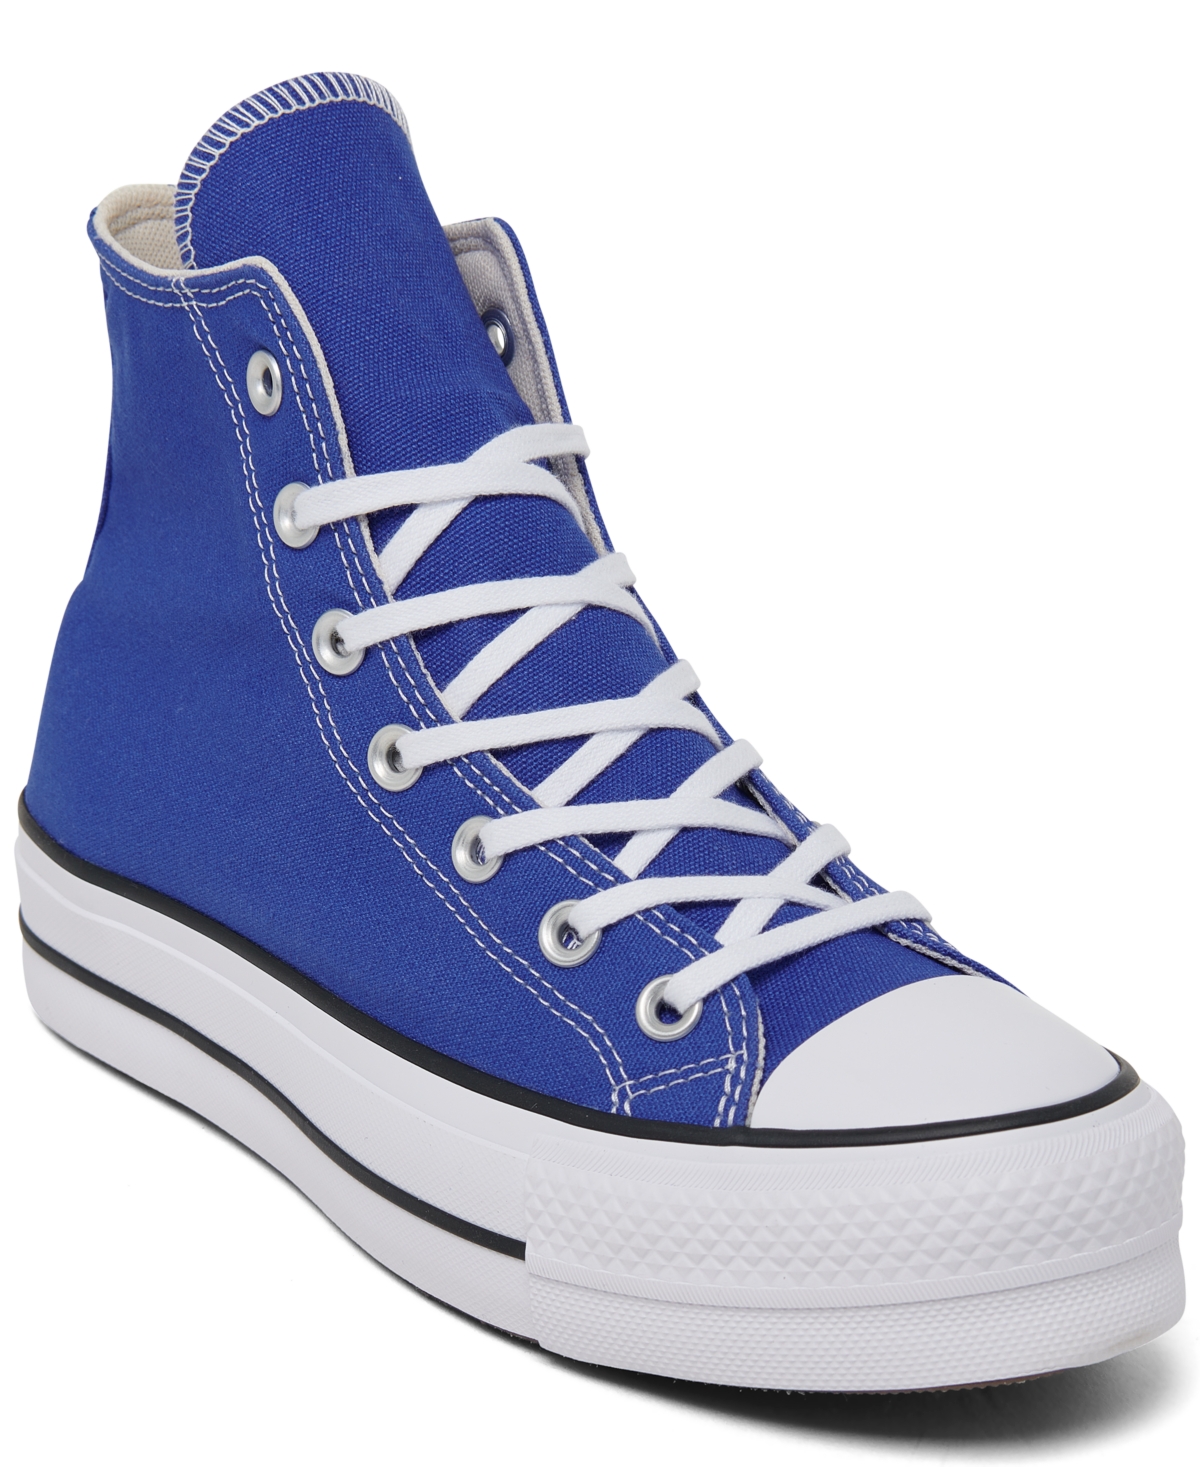 Women's Chuck Taylor All Star Lift Platform High Top Casual Sneakers from Finish Line - Blue Flame, White, Black